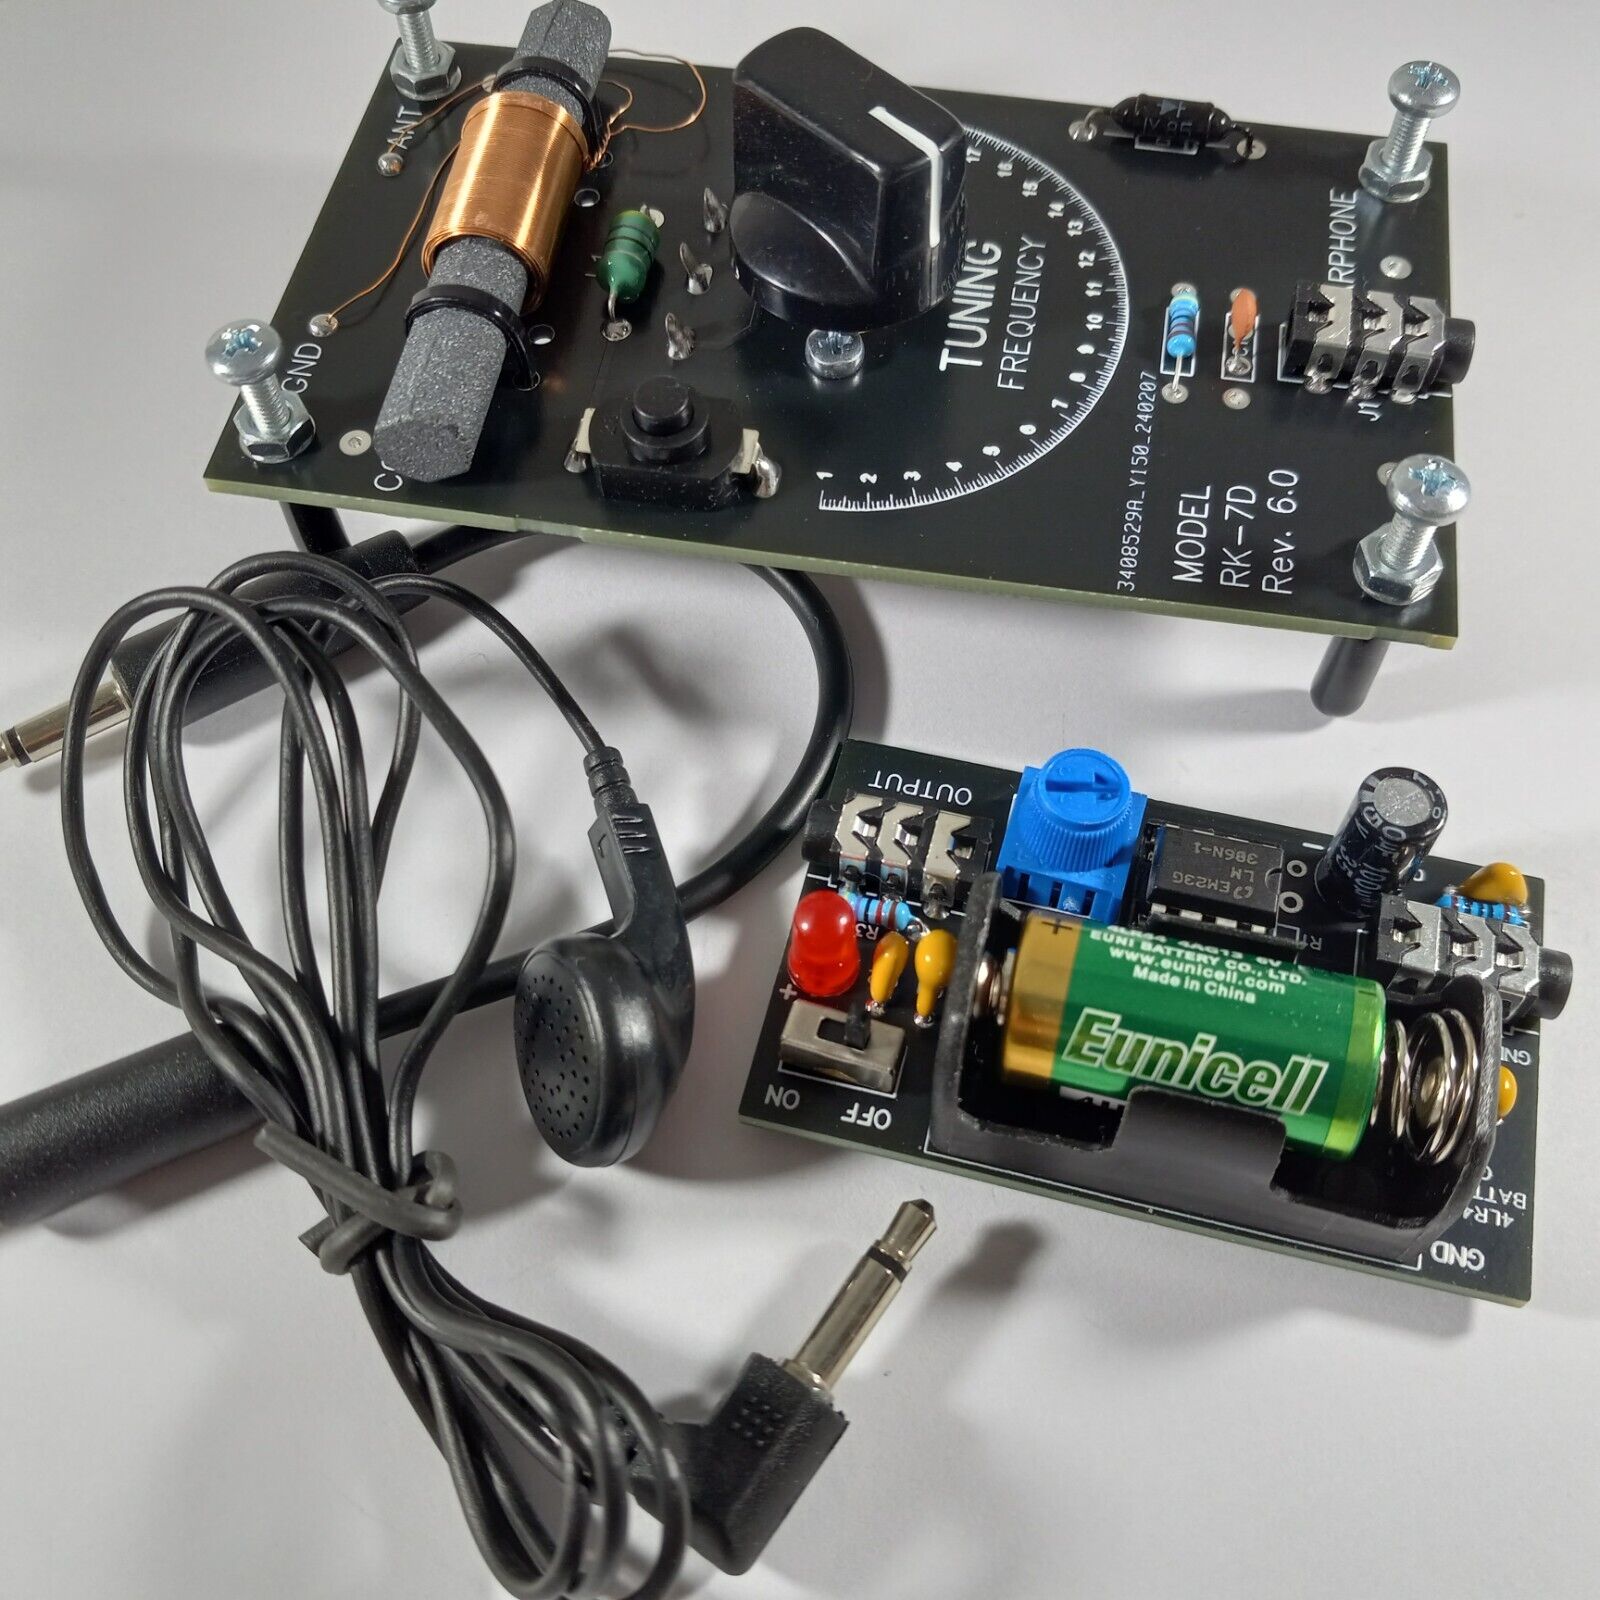 Germanium Crystal Radio Receiver Assembled with Earphone and LM386 Amplifier